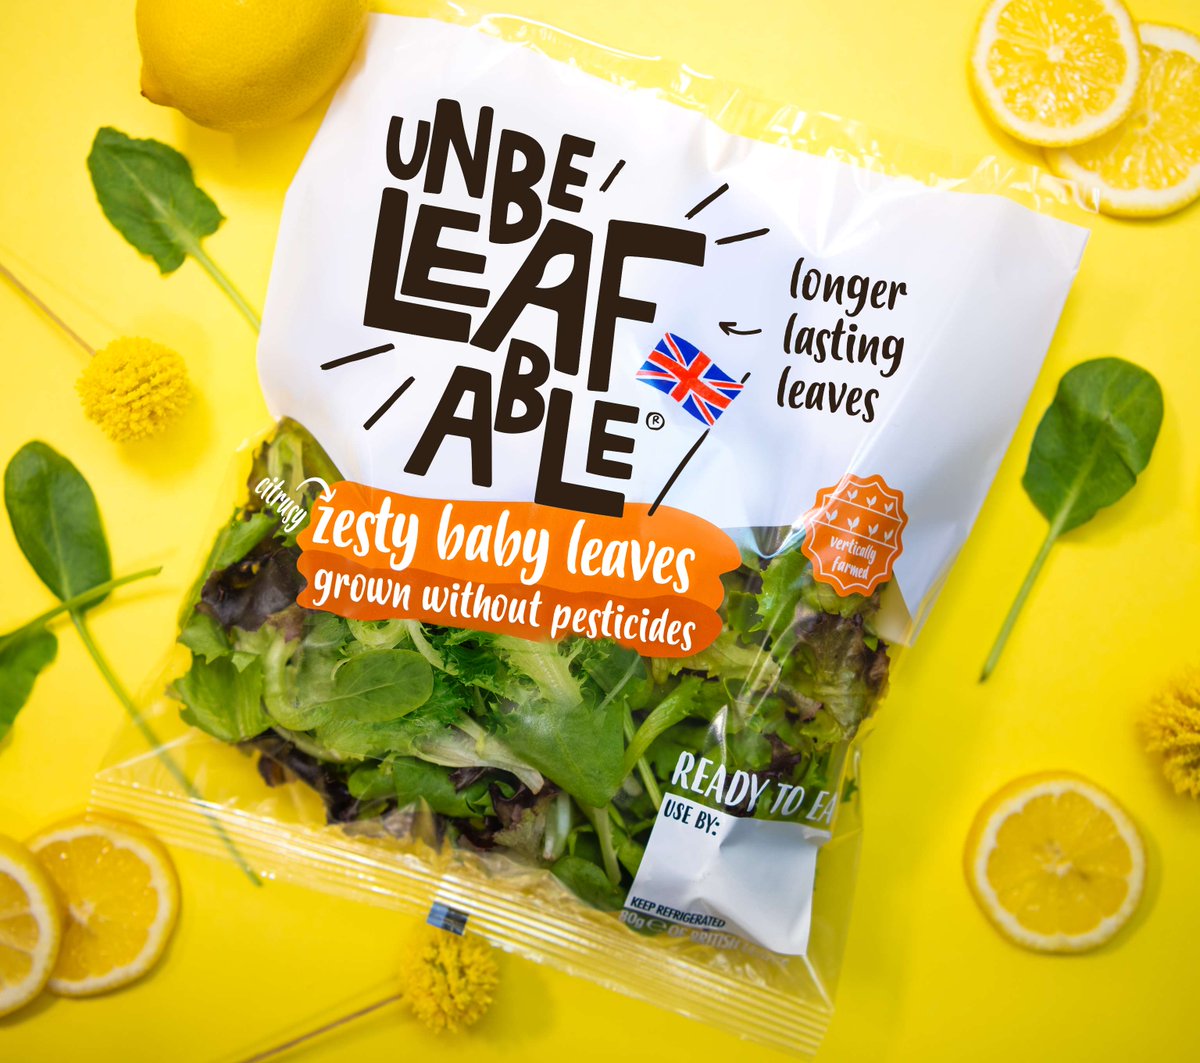 Exciting NEW product alert! 🍋 Our @Unbeleafableuk zesty baby leaves are now available at selected @TescoFood stores. We can’t wait for you to try this zingy mix - it's #SimplyTheZest